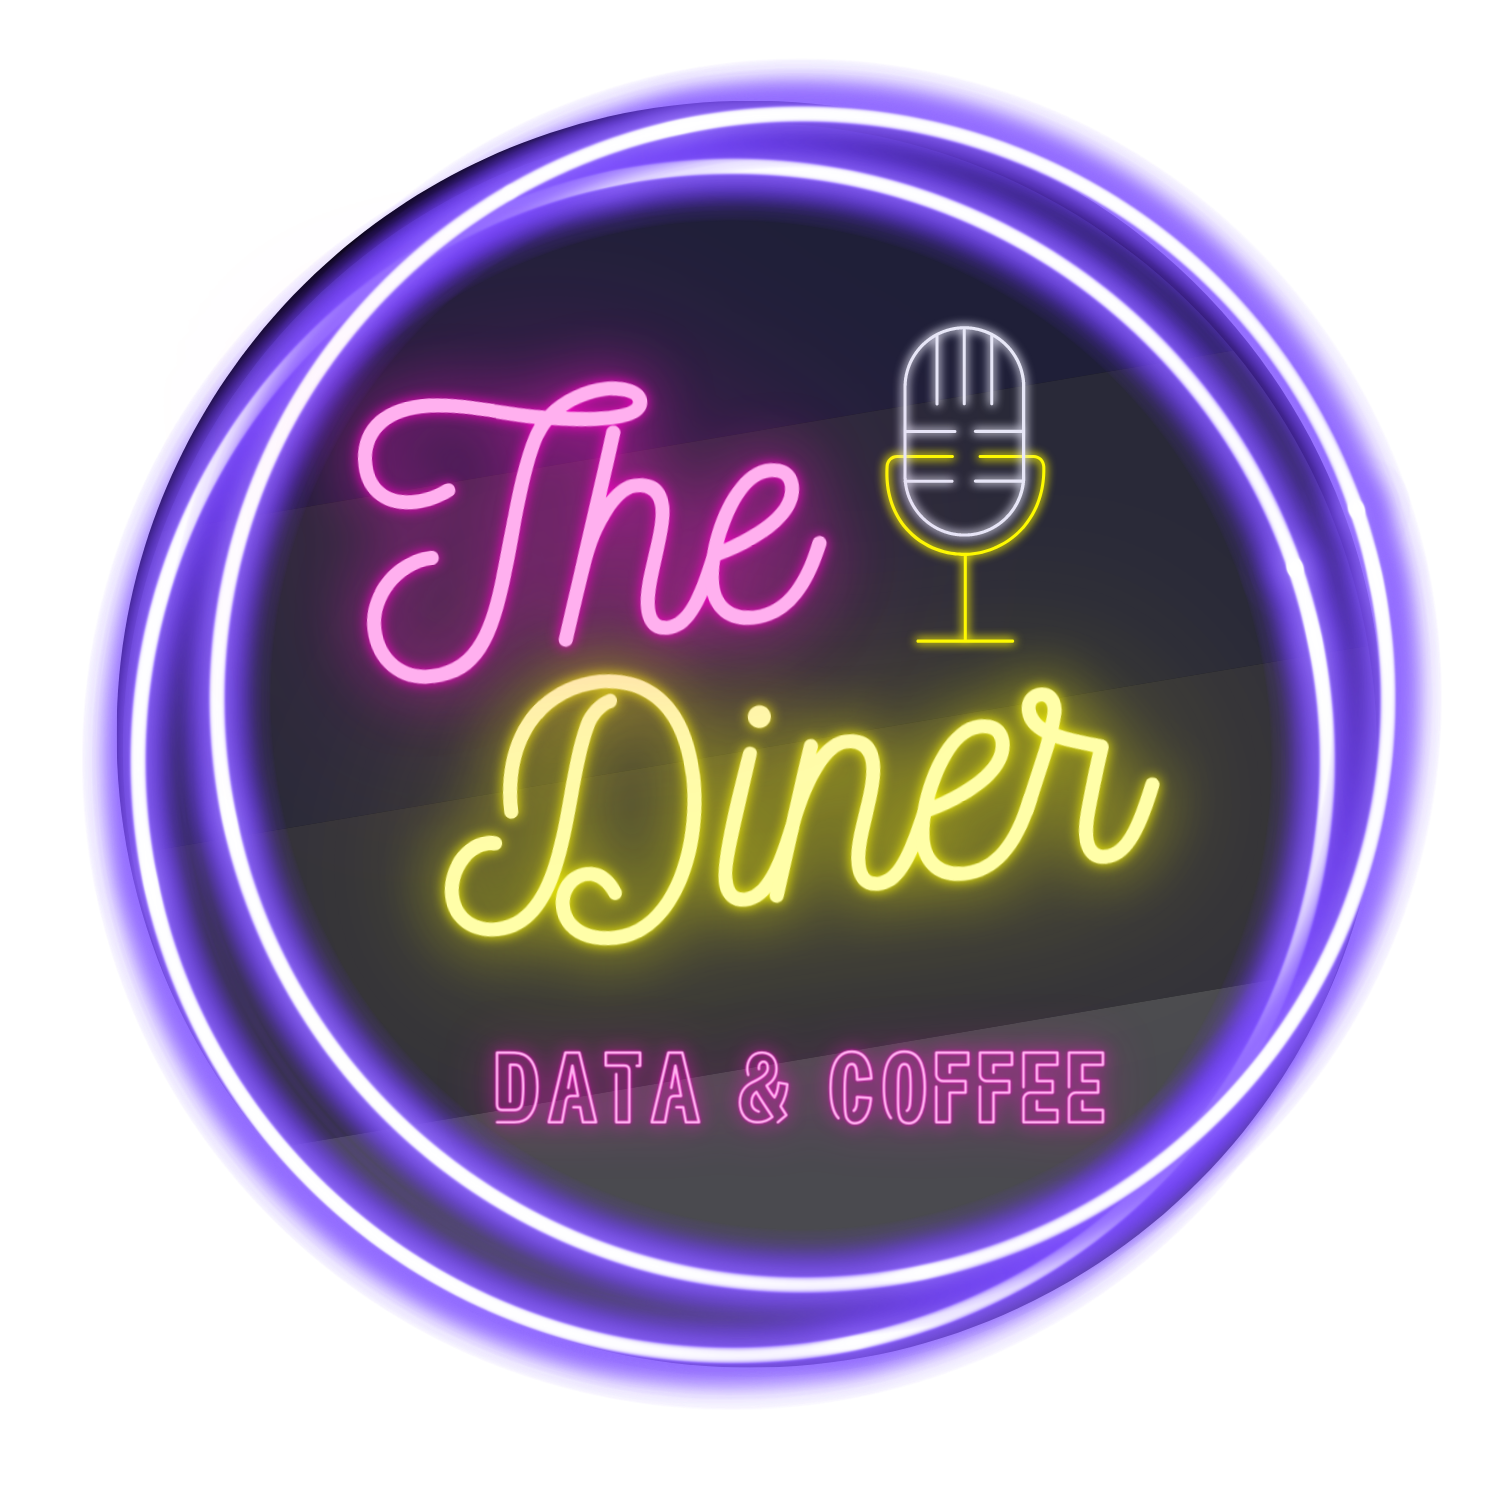 The Diner Podcast